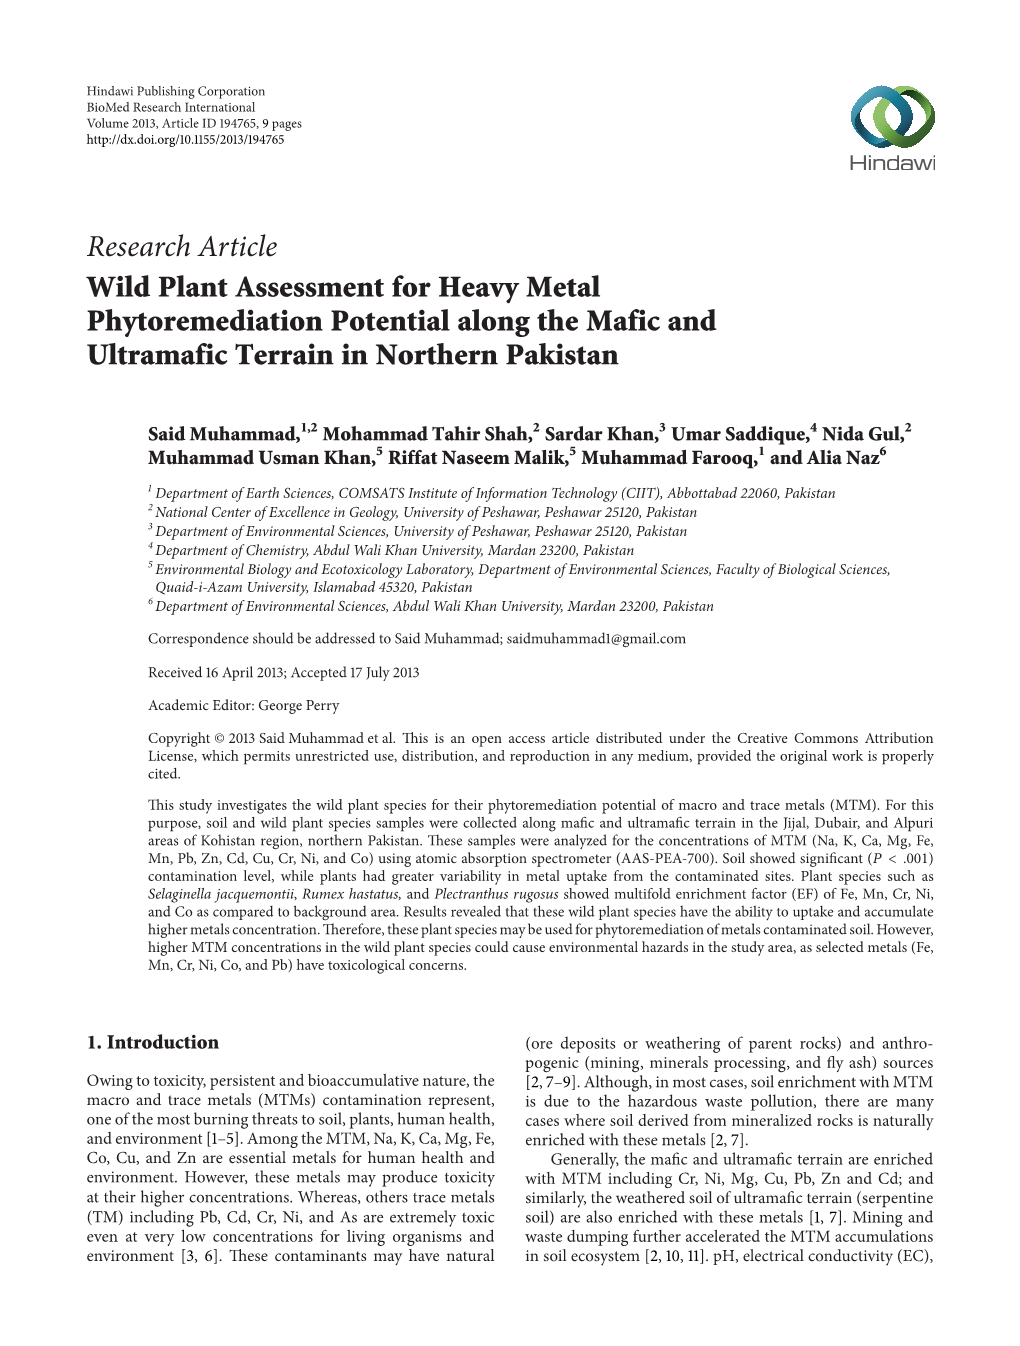 Wild Plant Assessment for Heavy Metal Phytoremediation Potential Along the Mafic and Ultramafic Terrain in Northern Pakistan